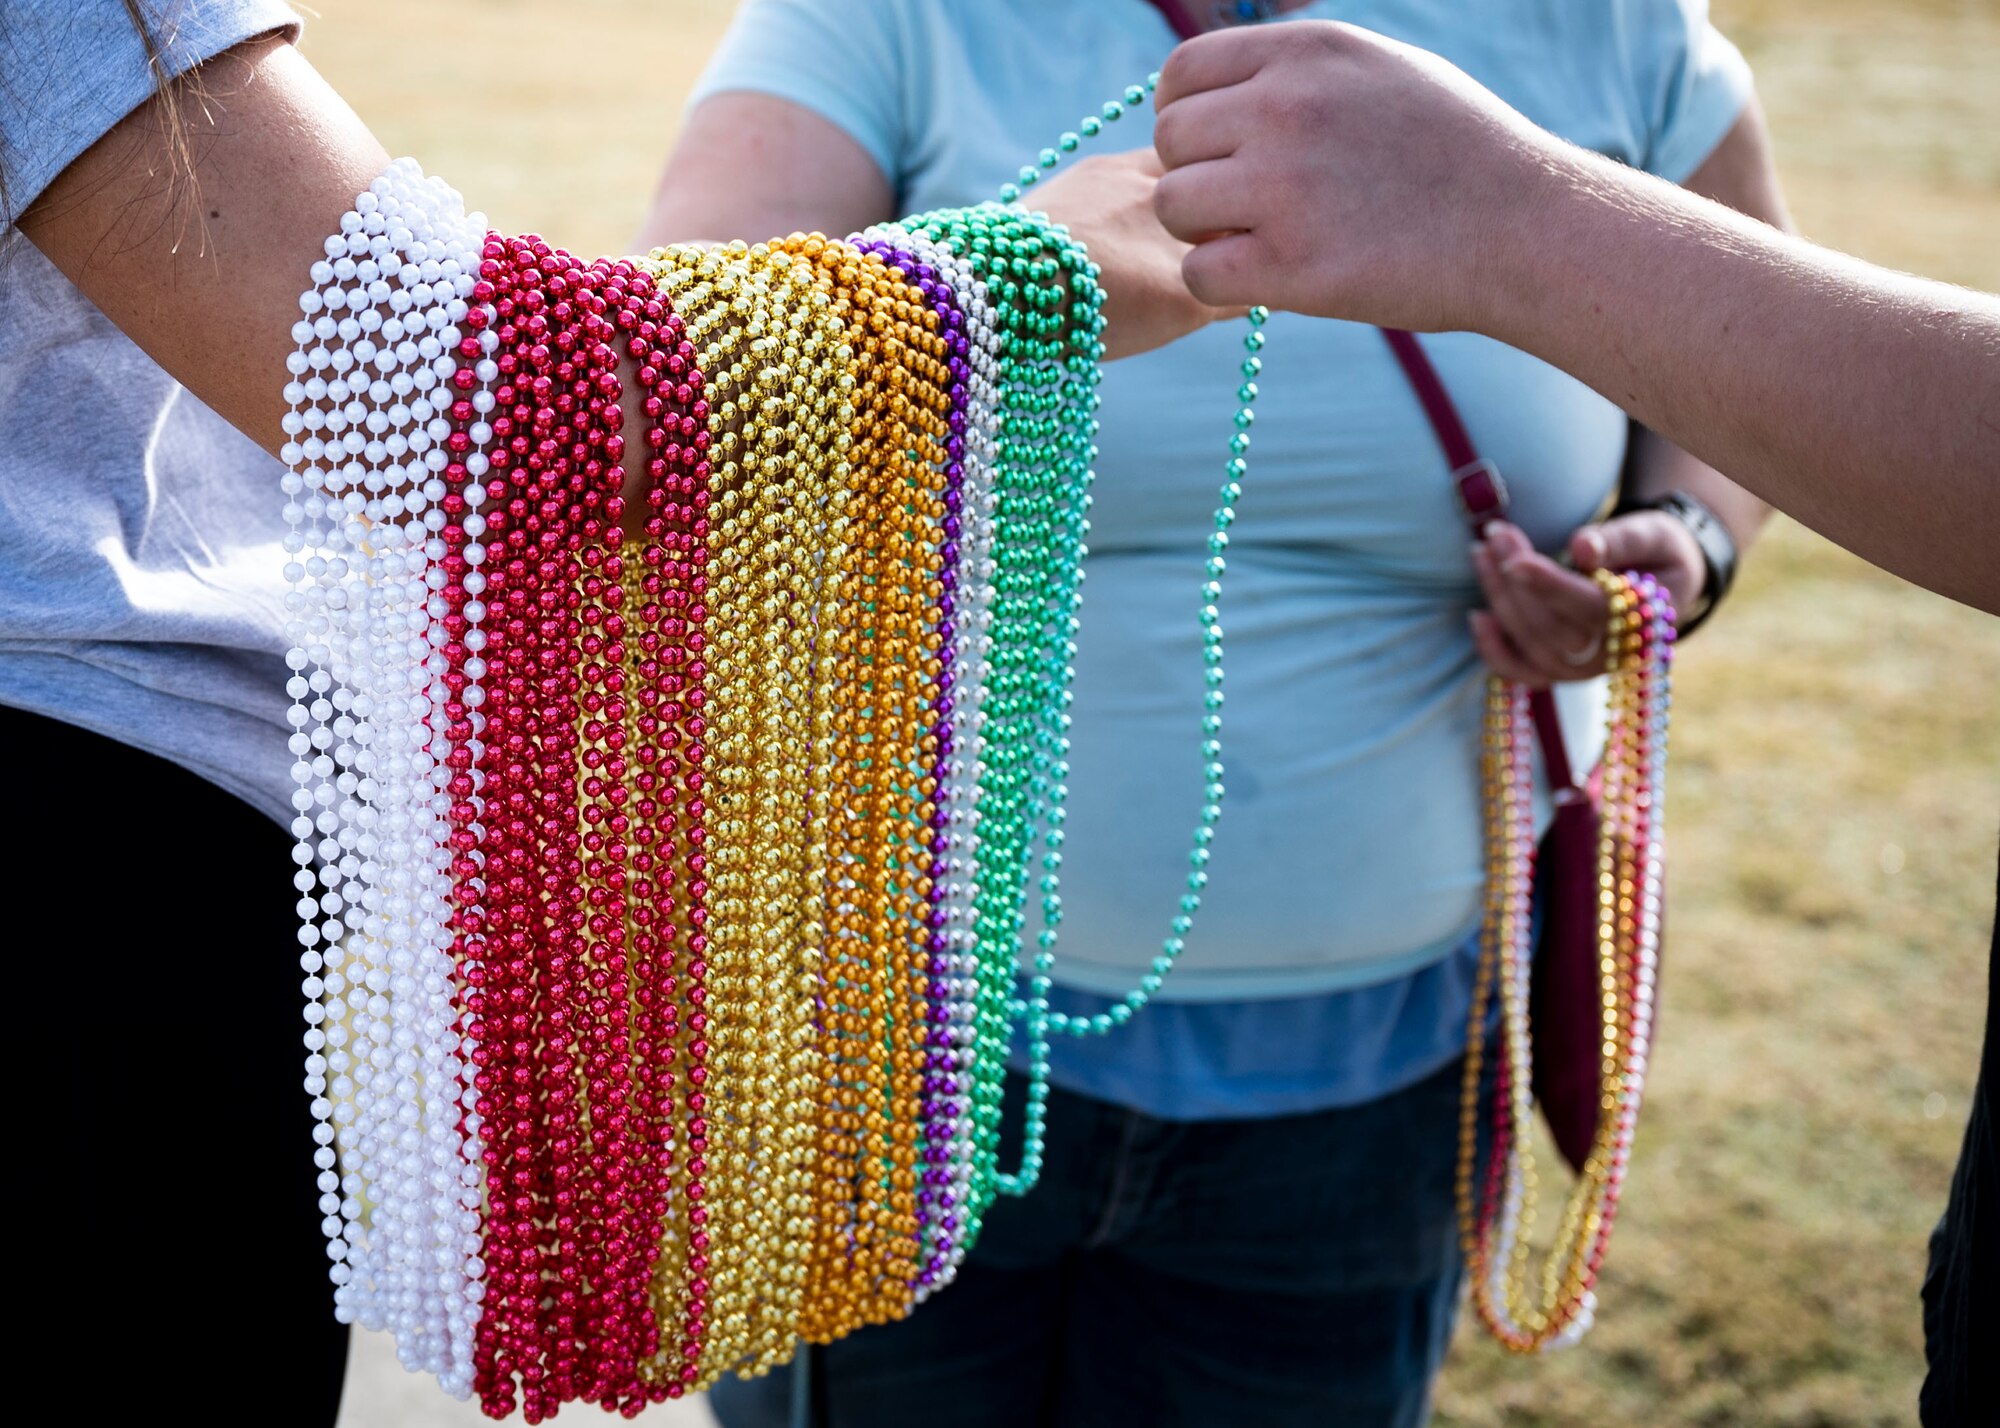 AFSP volunteer hands out colored beads at Suicide Prevention walk